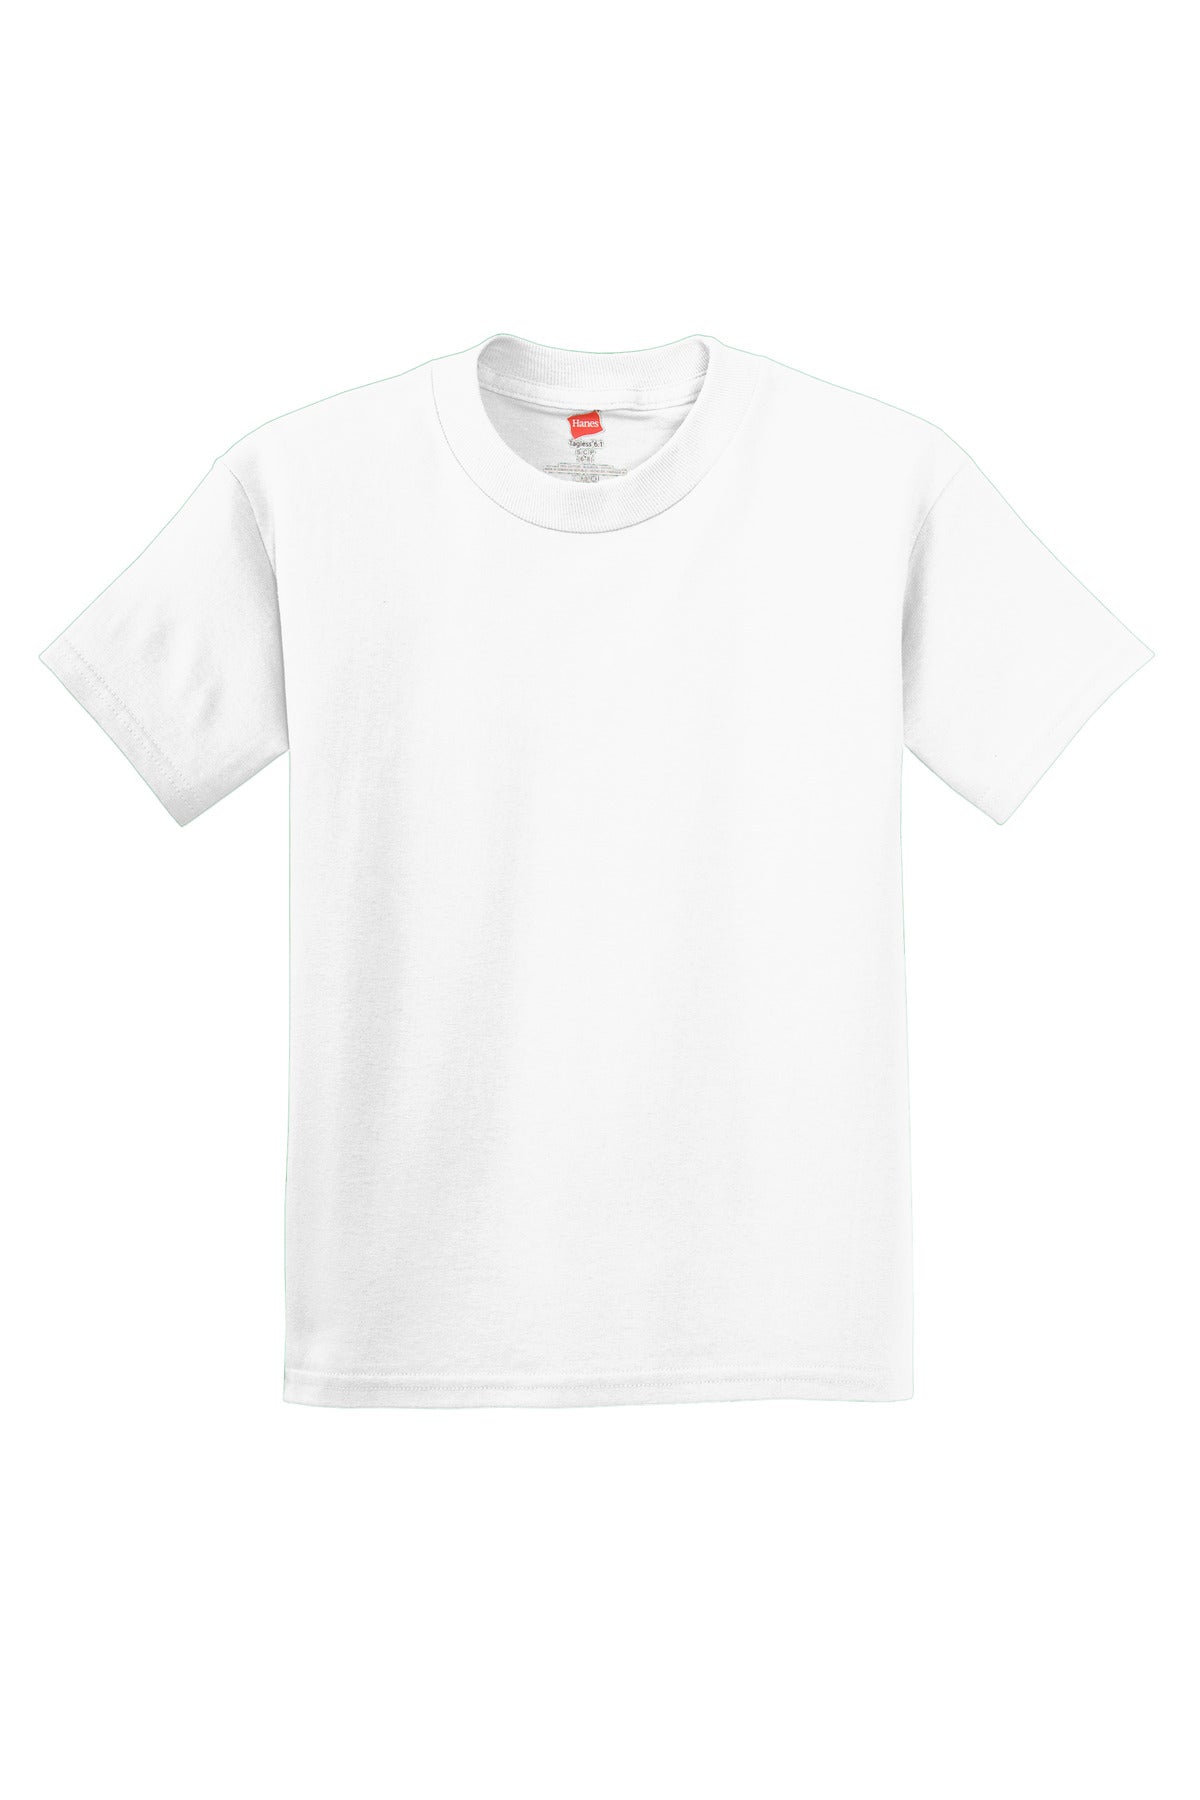 Photo of Hanes T-Shirts 5450  color  White